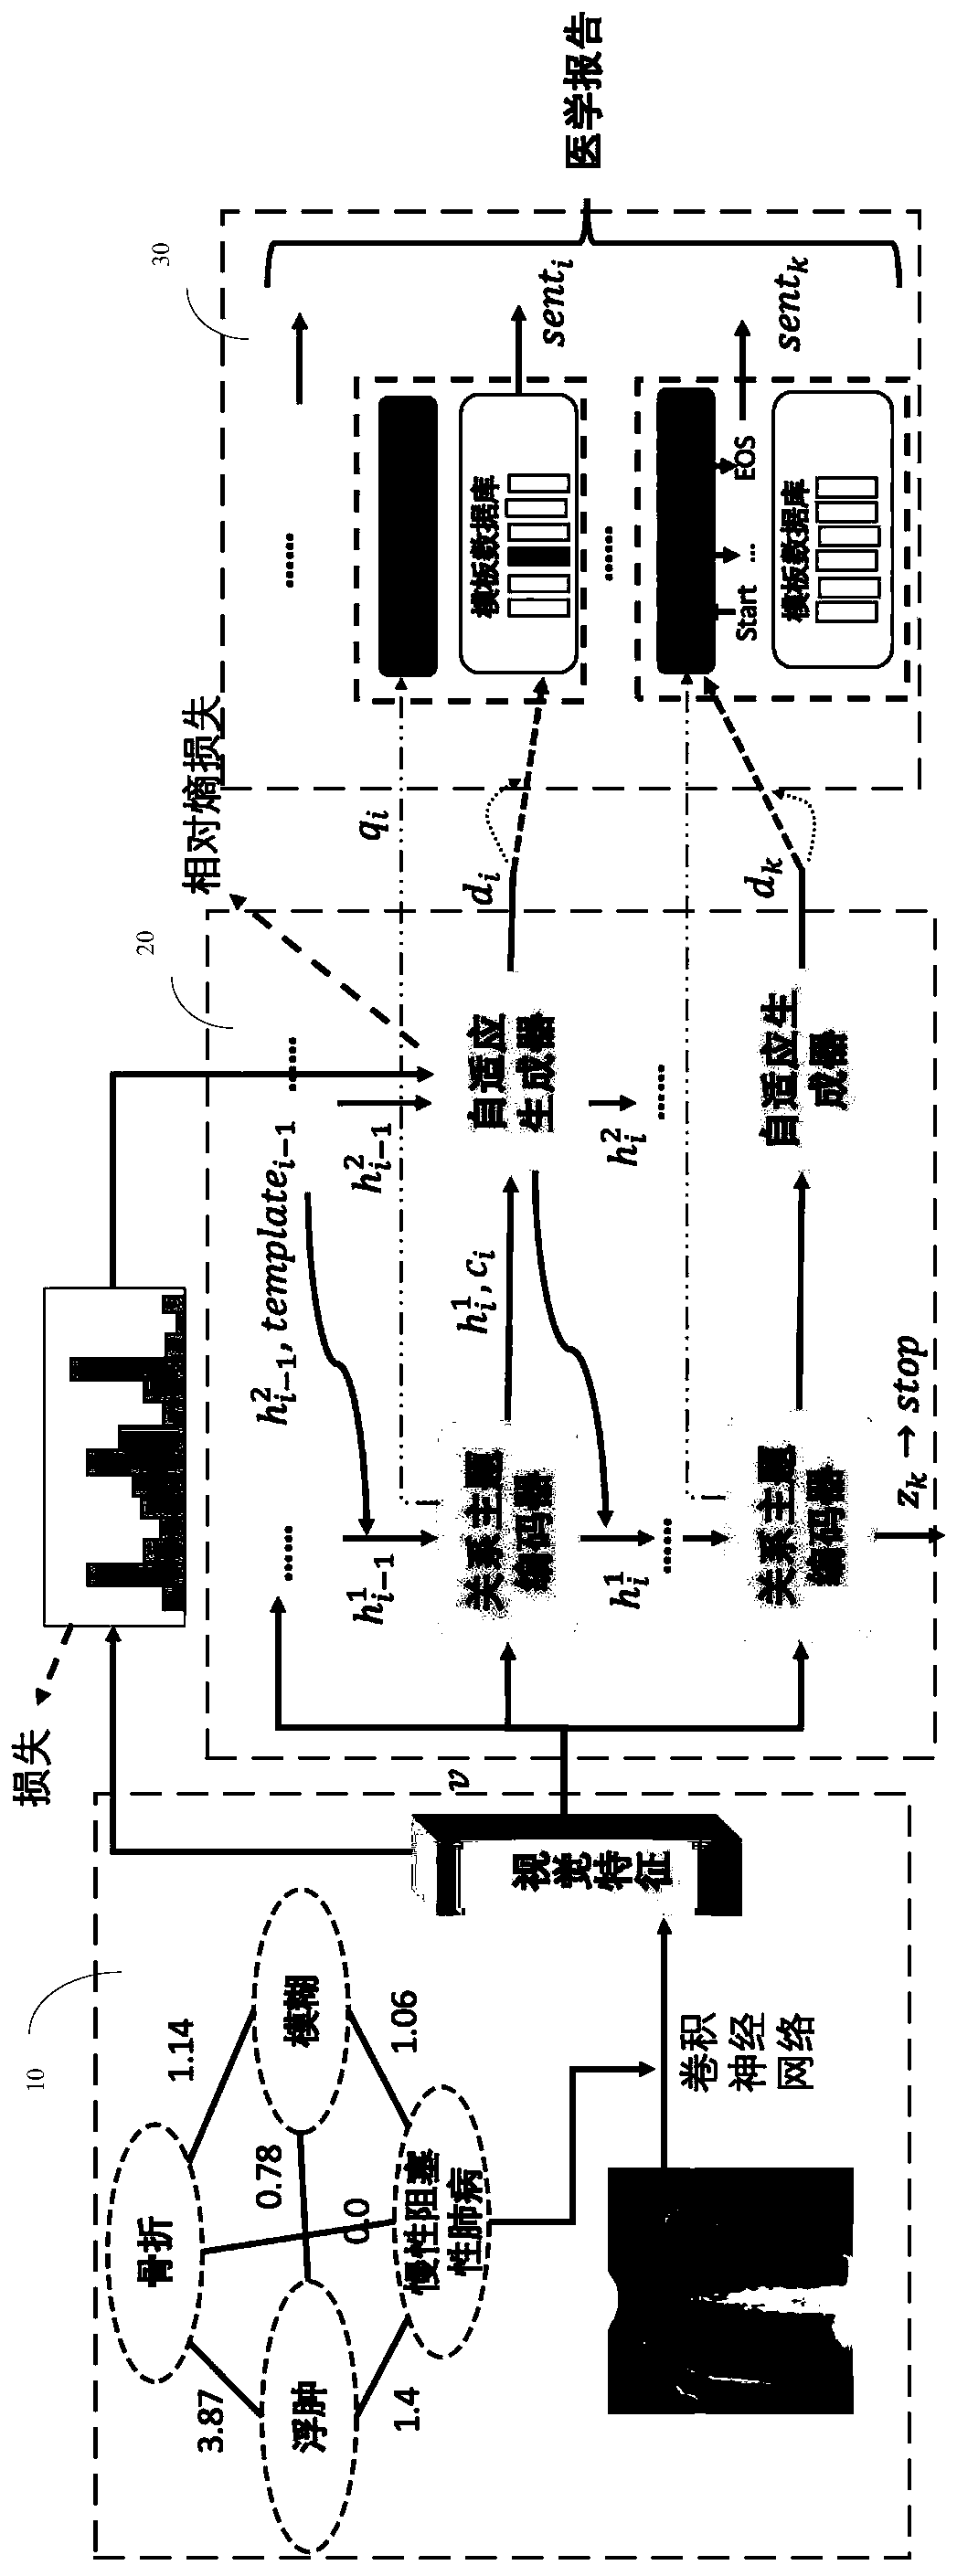 Medical report generating model based on relation model, and generating method thereof